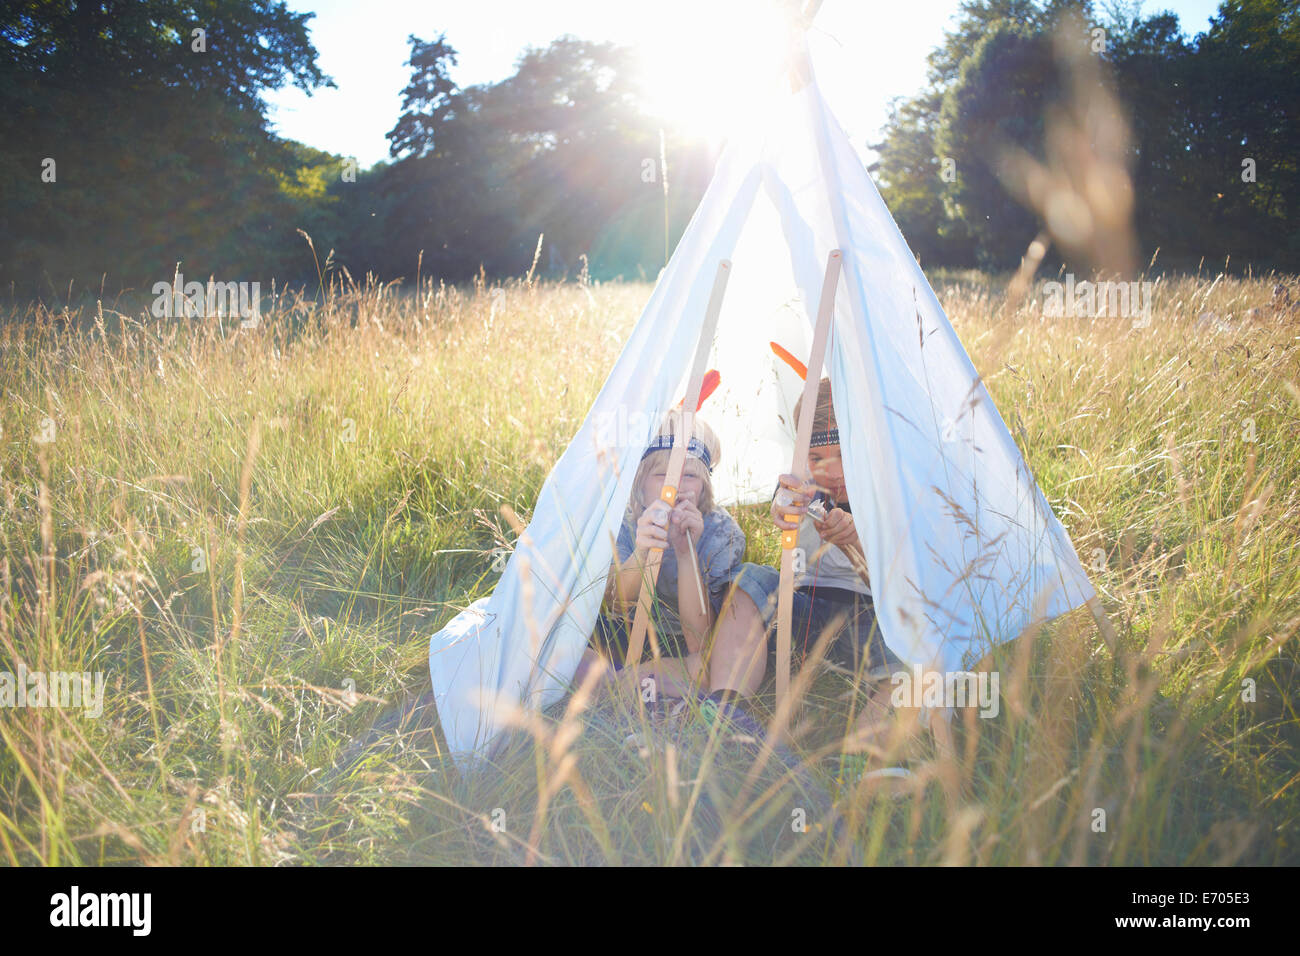 Two young boys sitting inside a teepee Stock Photo